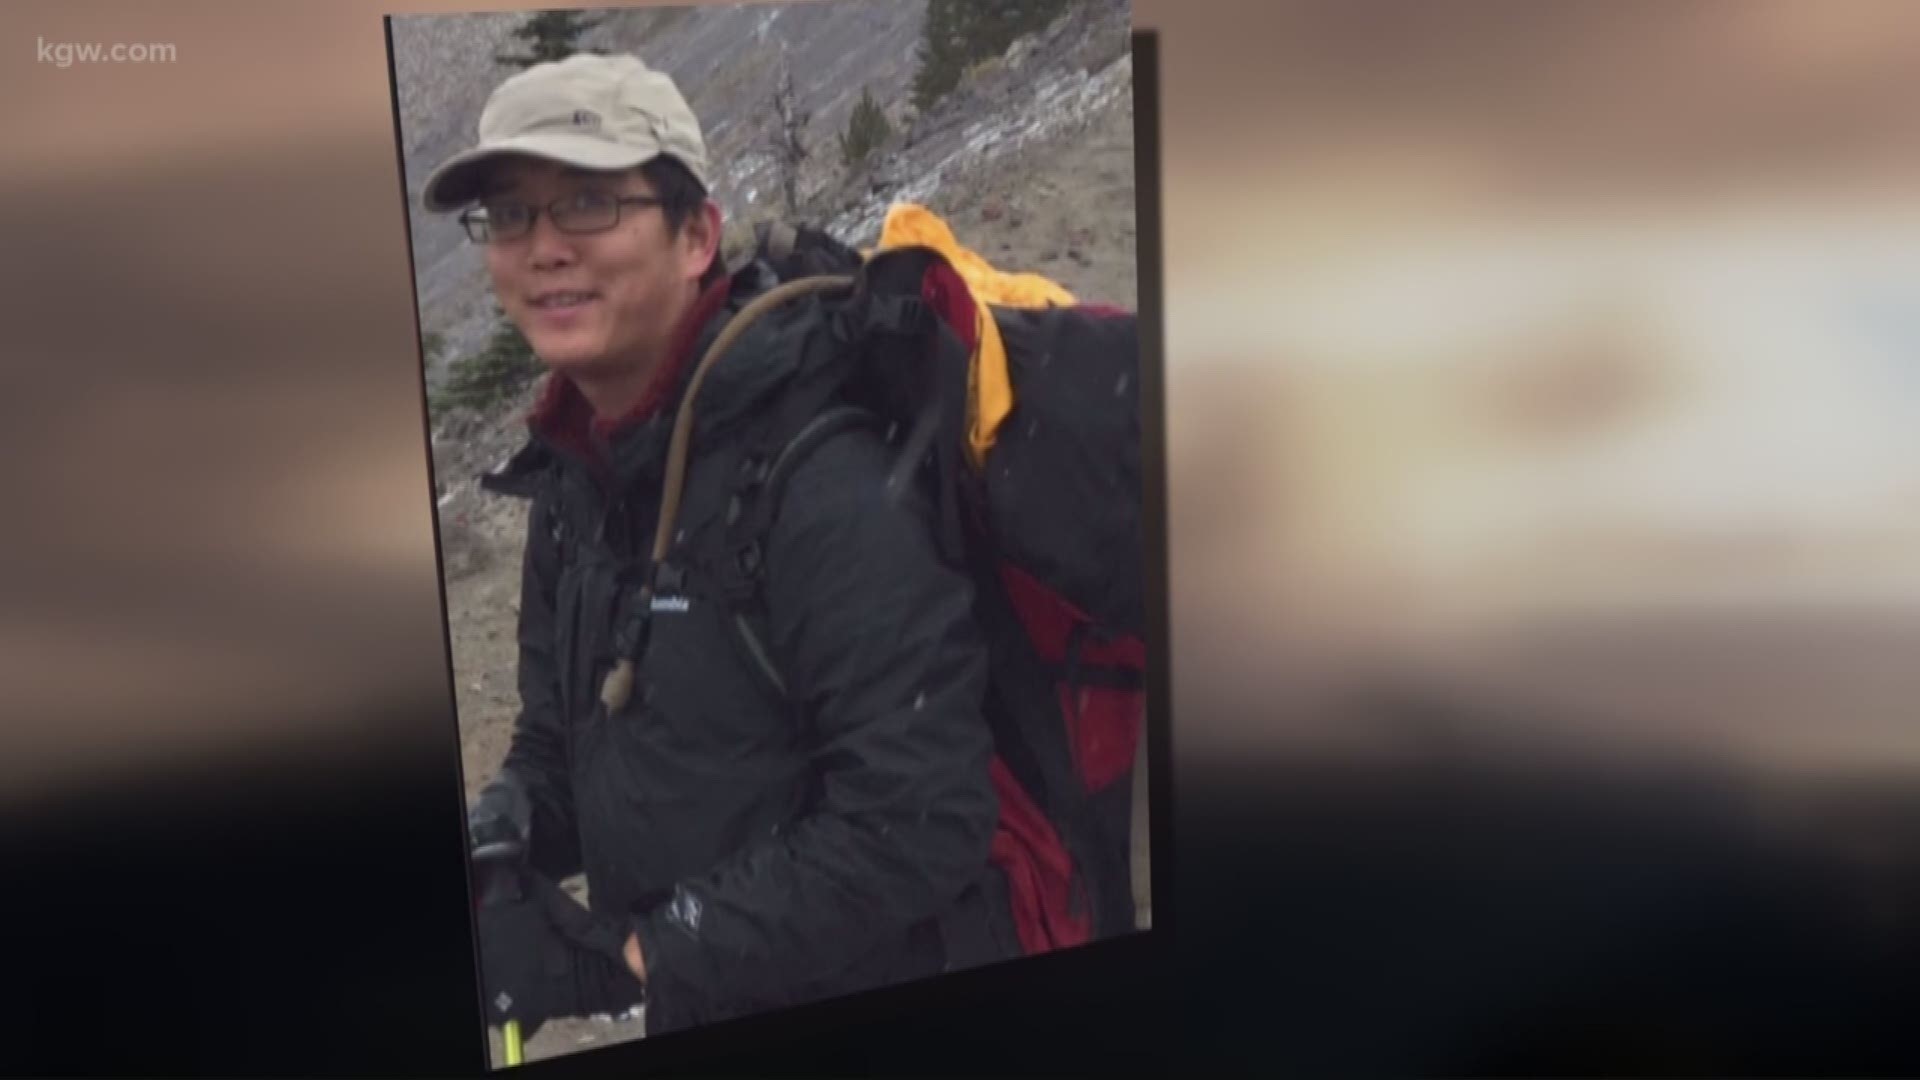 Searchers recovered the body of a missing Arizona man who was hiking on Mount Hood.